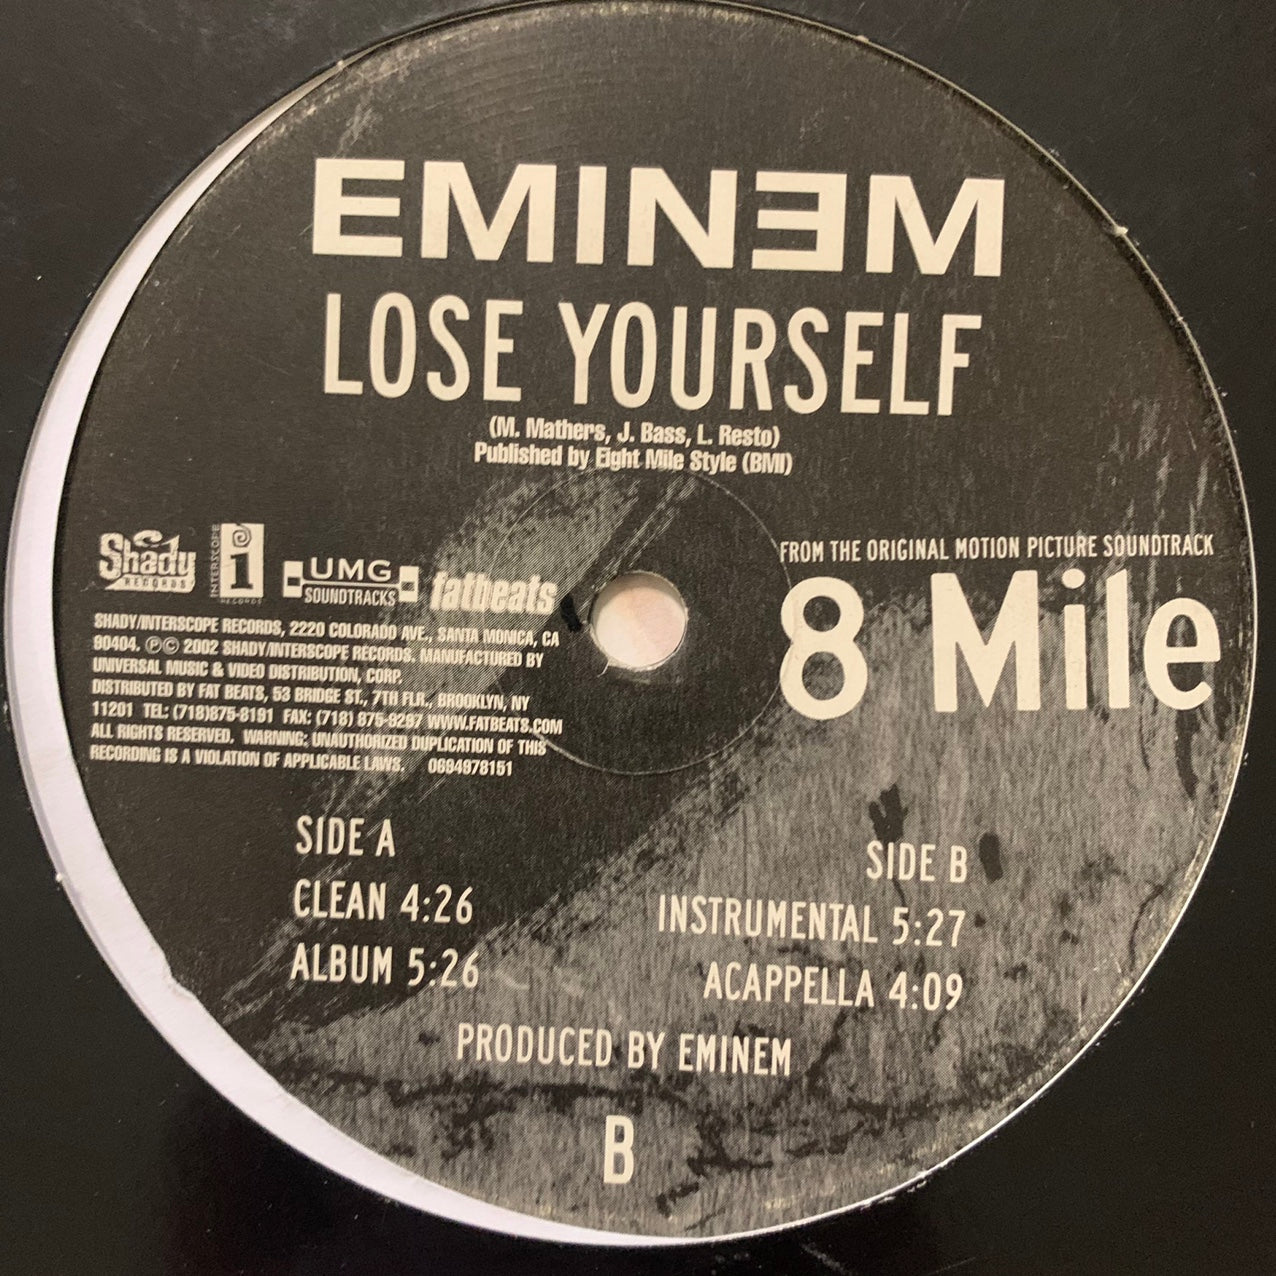 Eminem “Lose Yourself” From The Original Motion Picture 8 Mile 4 Version 12inch Vinyl